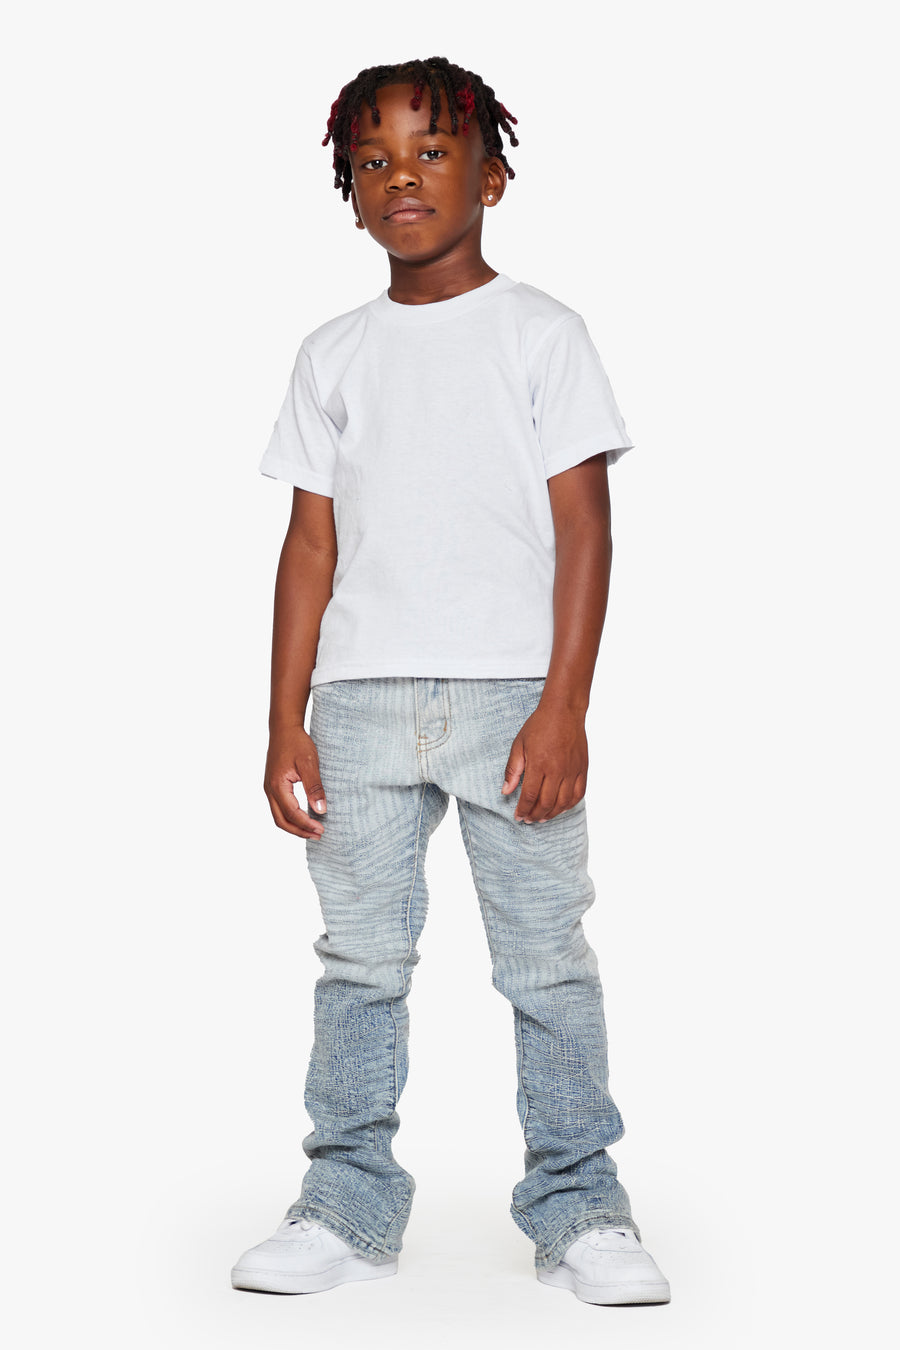 "MR. EMBROIDERY" ICY AZURE KIDS STACKED FLARE